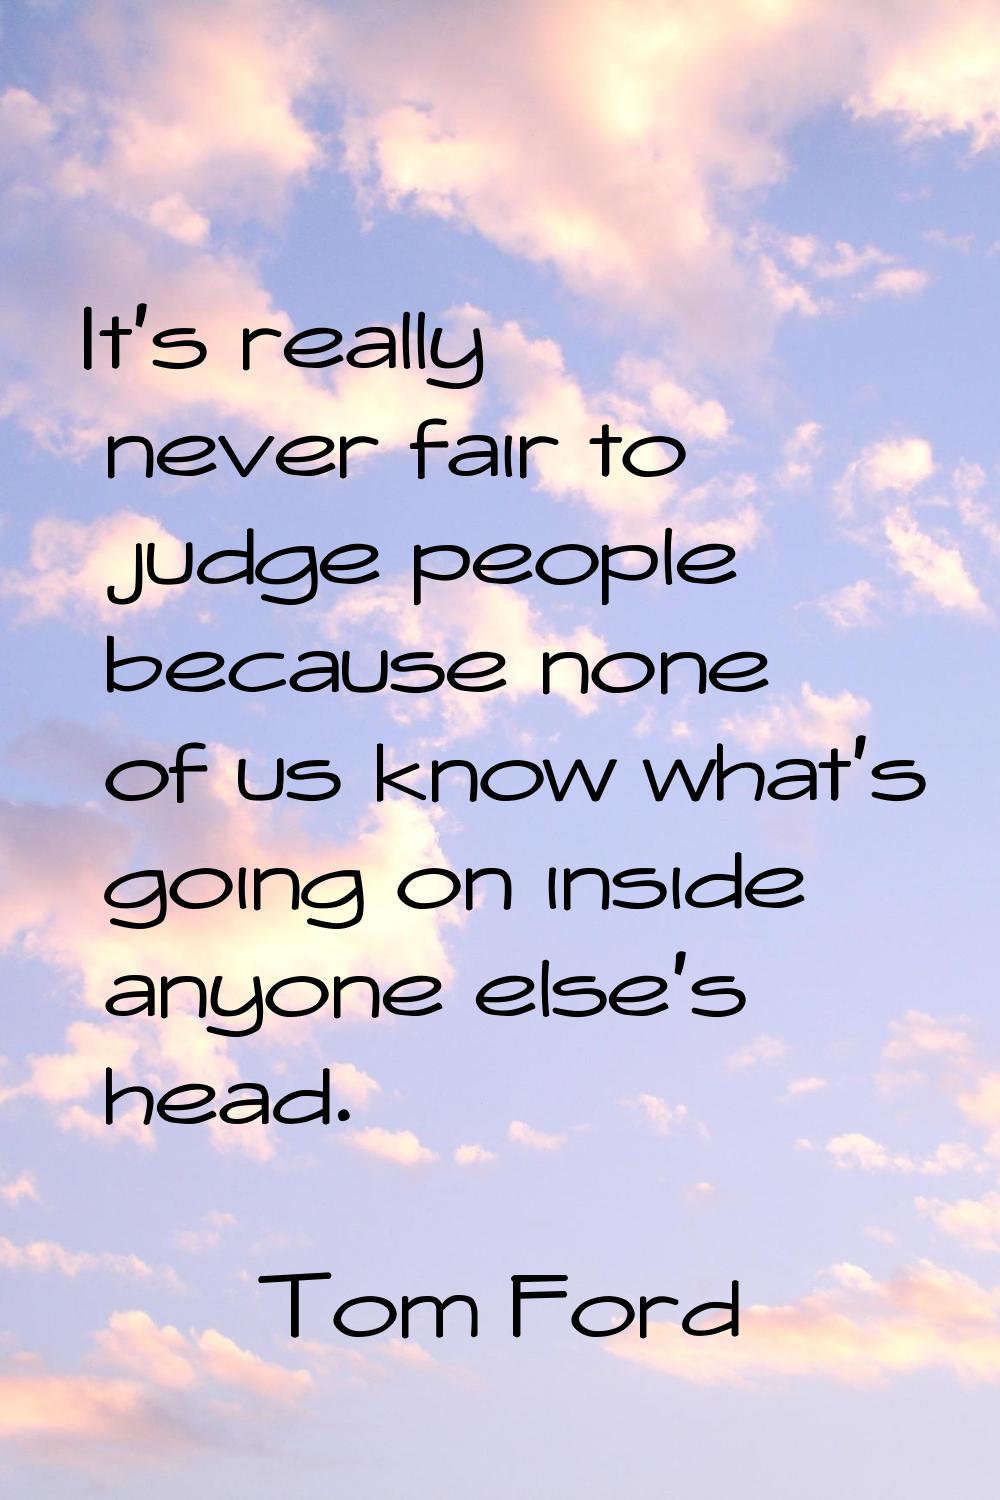 It's really never fair to judge people because none of us know what's going on inside anyone else's